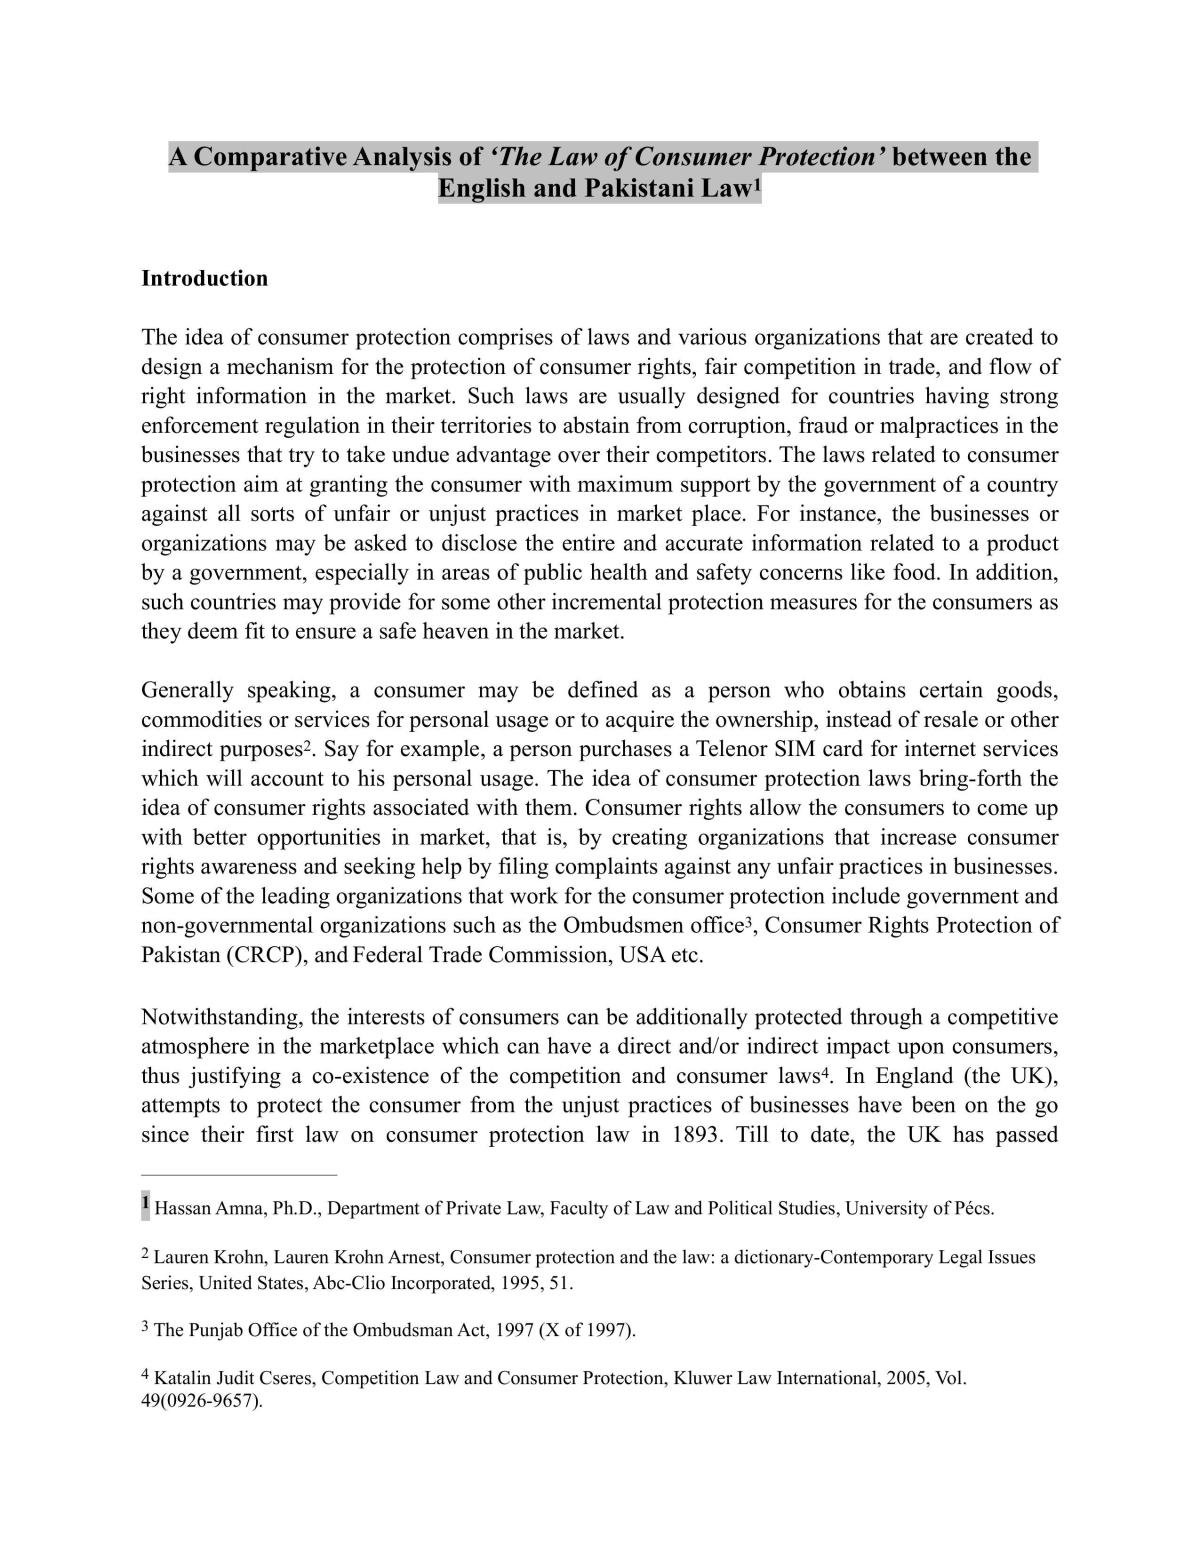 A Comparative Analysis of ‘The Law of Consumer Protection’ between the  English and Pakistani Law - Page 1